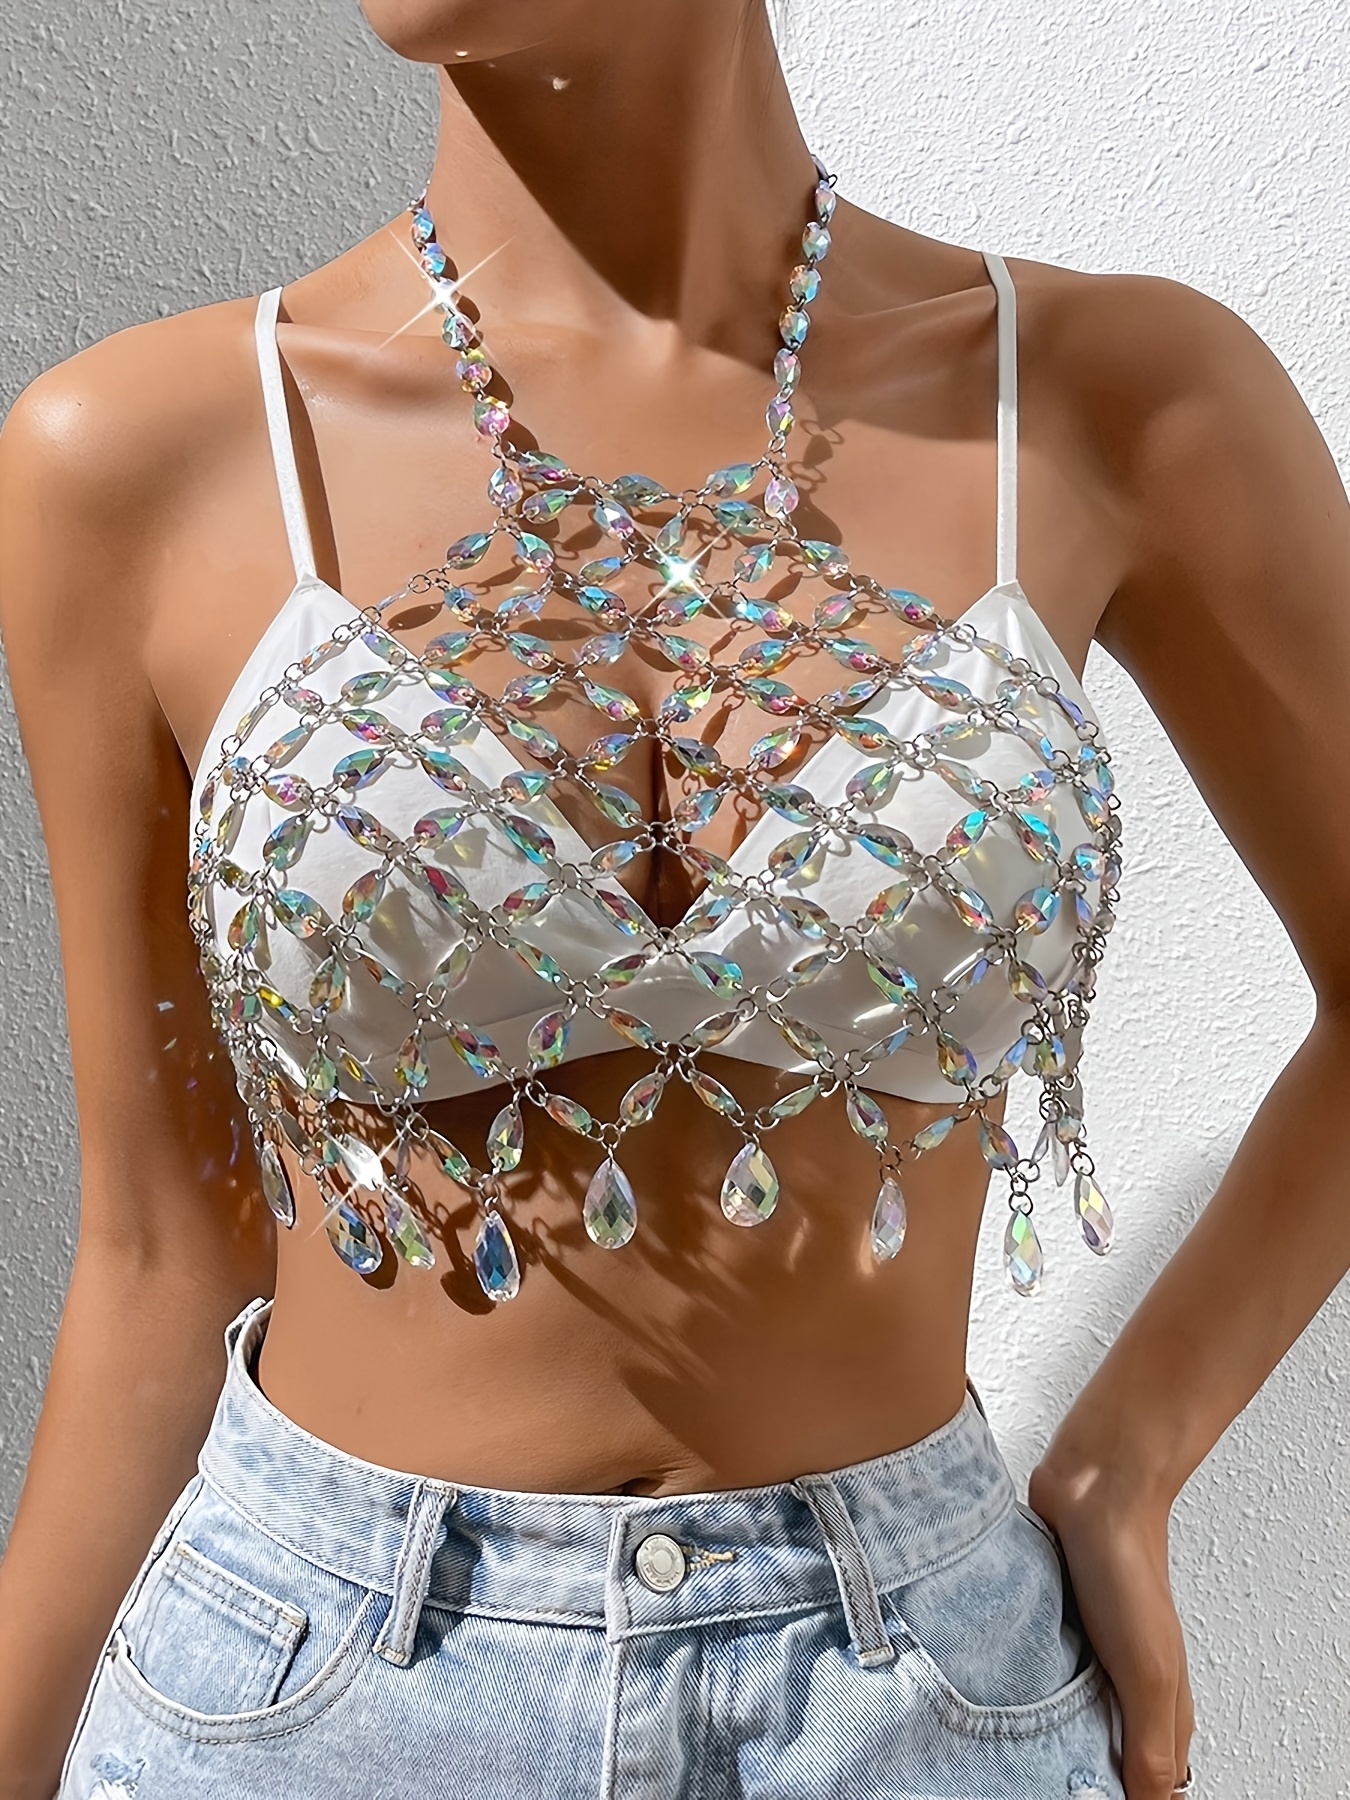 Sexy Party Cover Up Halter Top Bralette Rhinestone Studded Chain